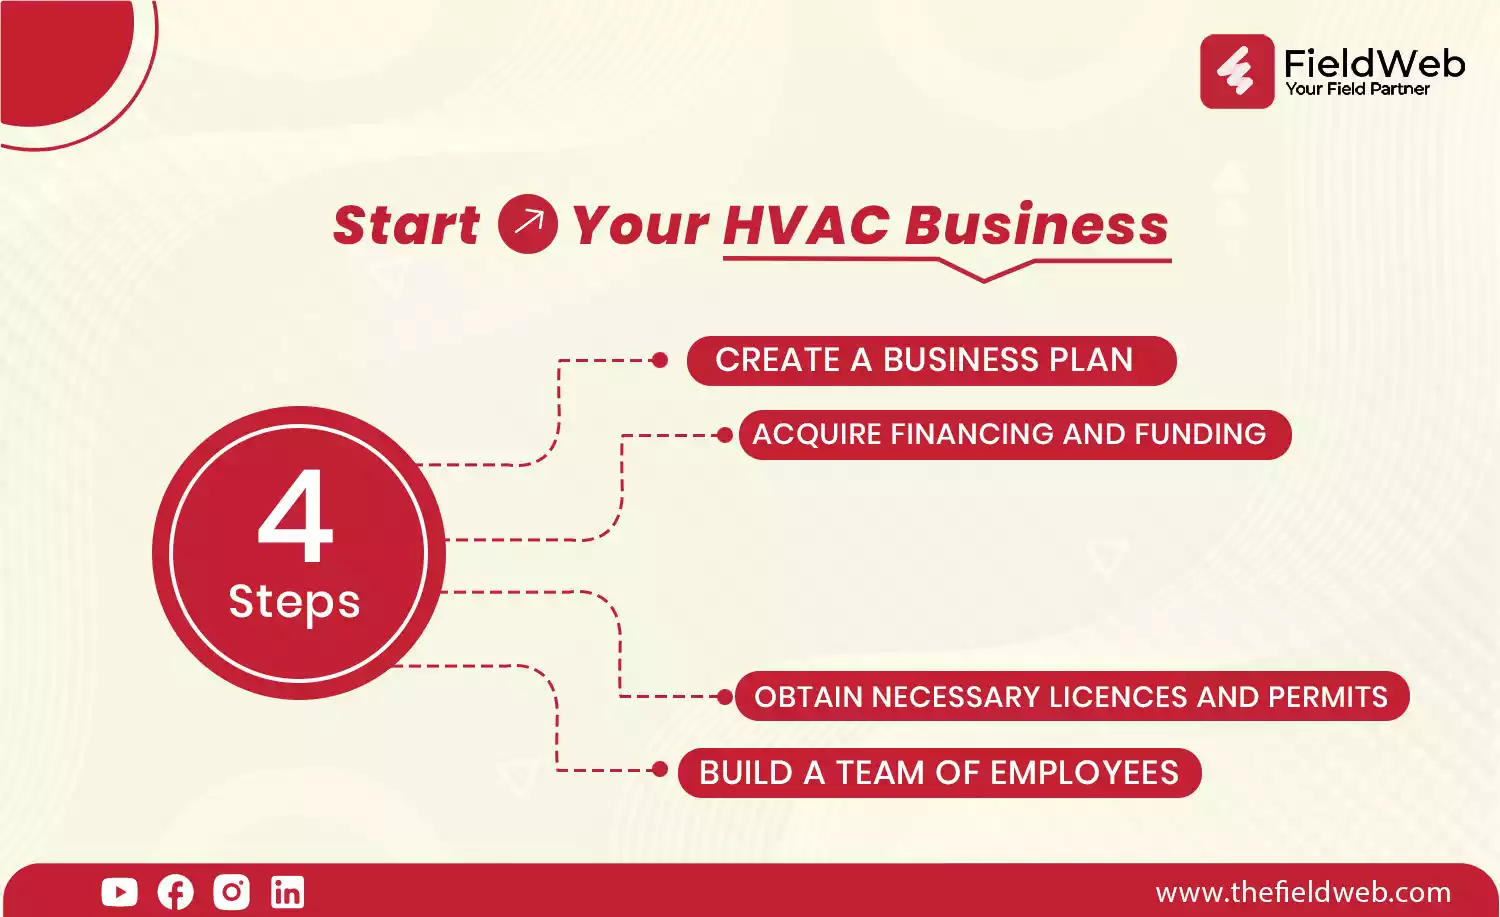 image is describing 4 steps to start the HVAC business